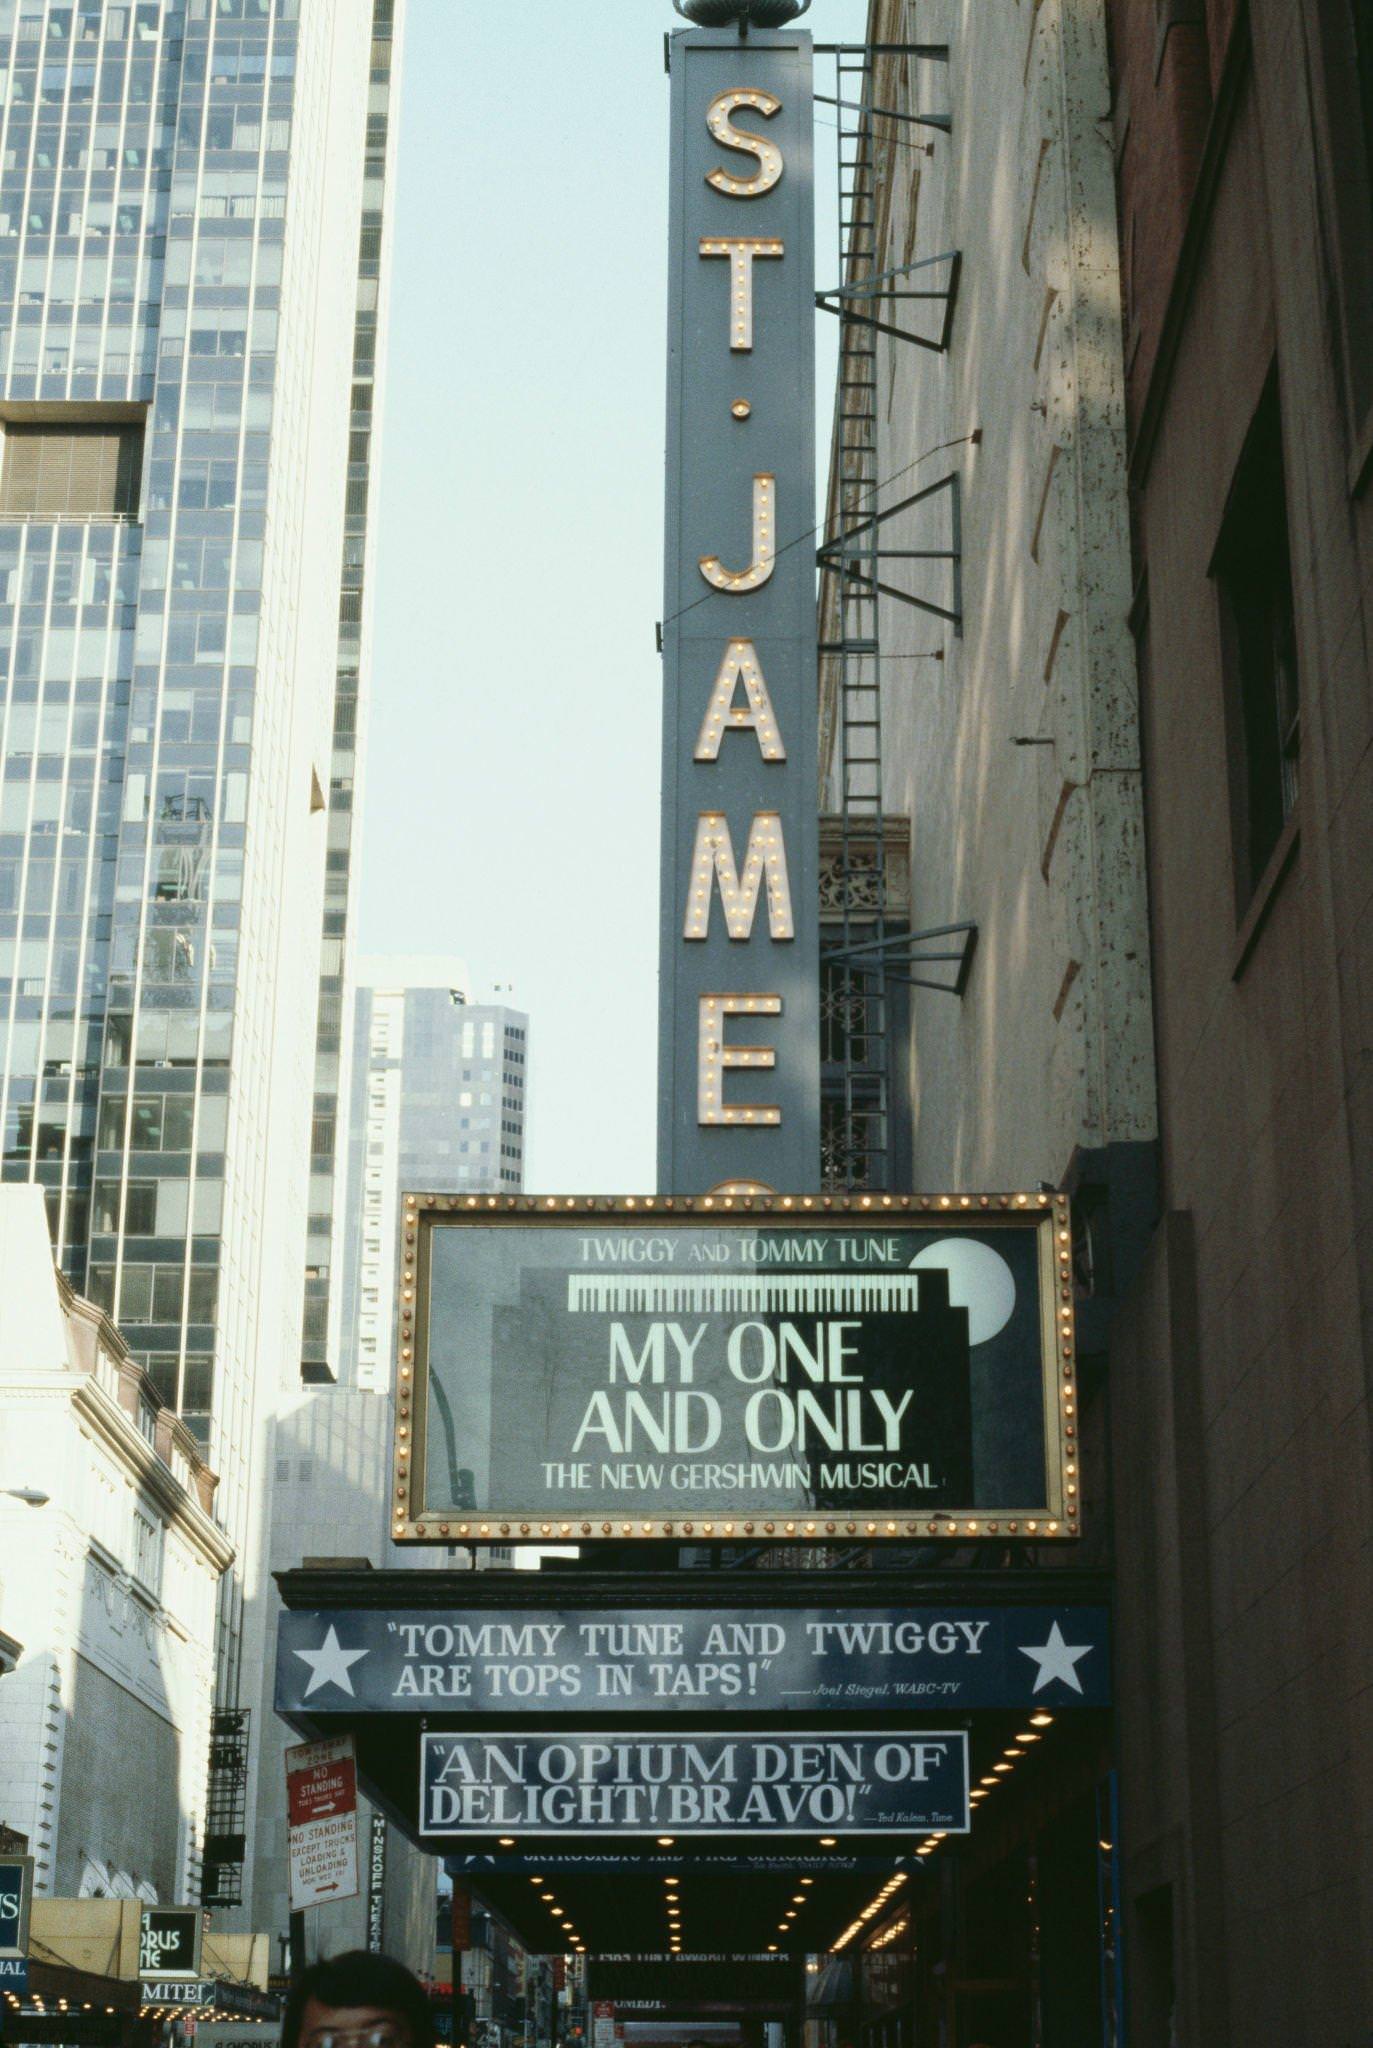 St James Theatre Staging 'My One And Only', Broadway, Midtown Manhattan, 1985